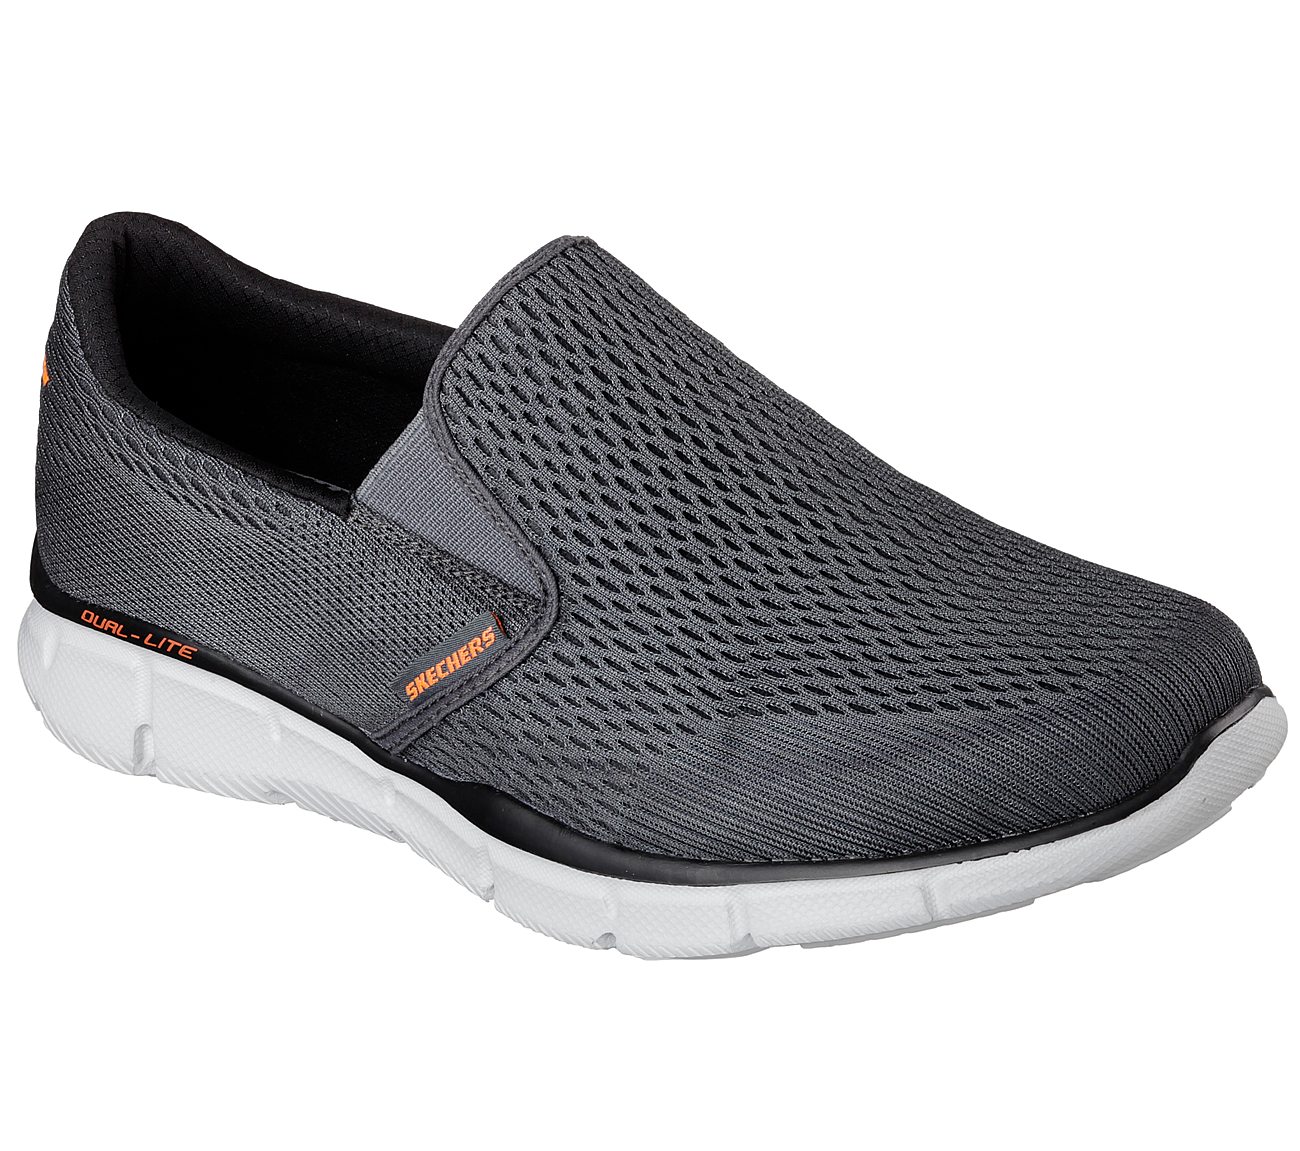 EQUALIZER- DOUBLE PLAY, CHARCOAL/ORANGE Footwear Right View